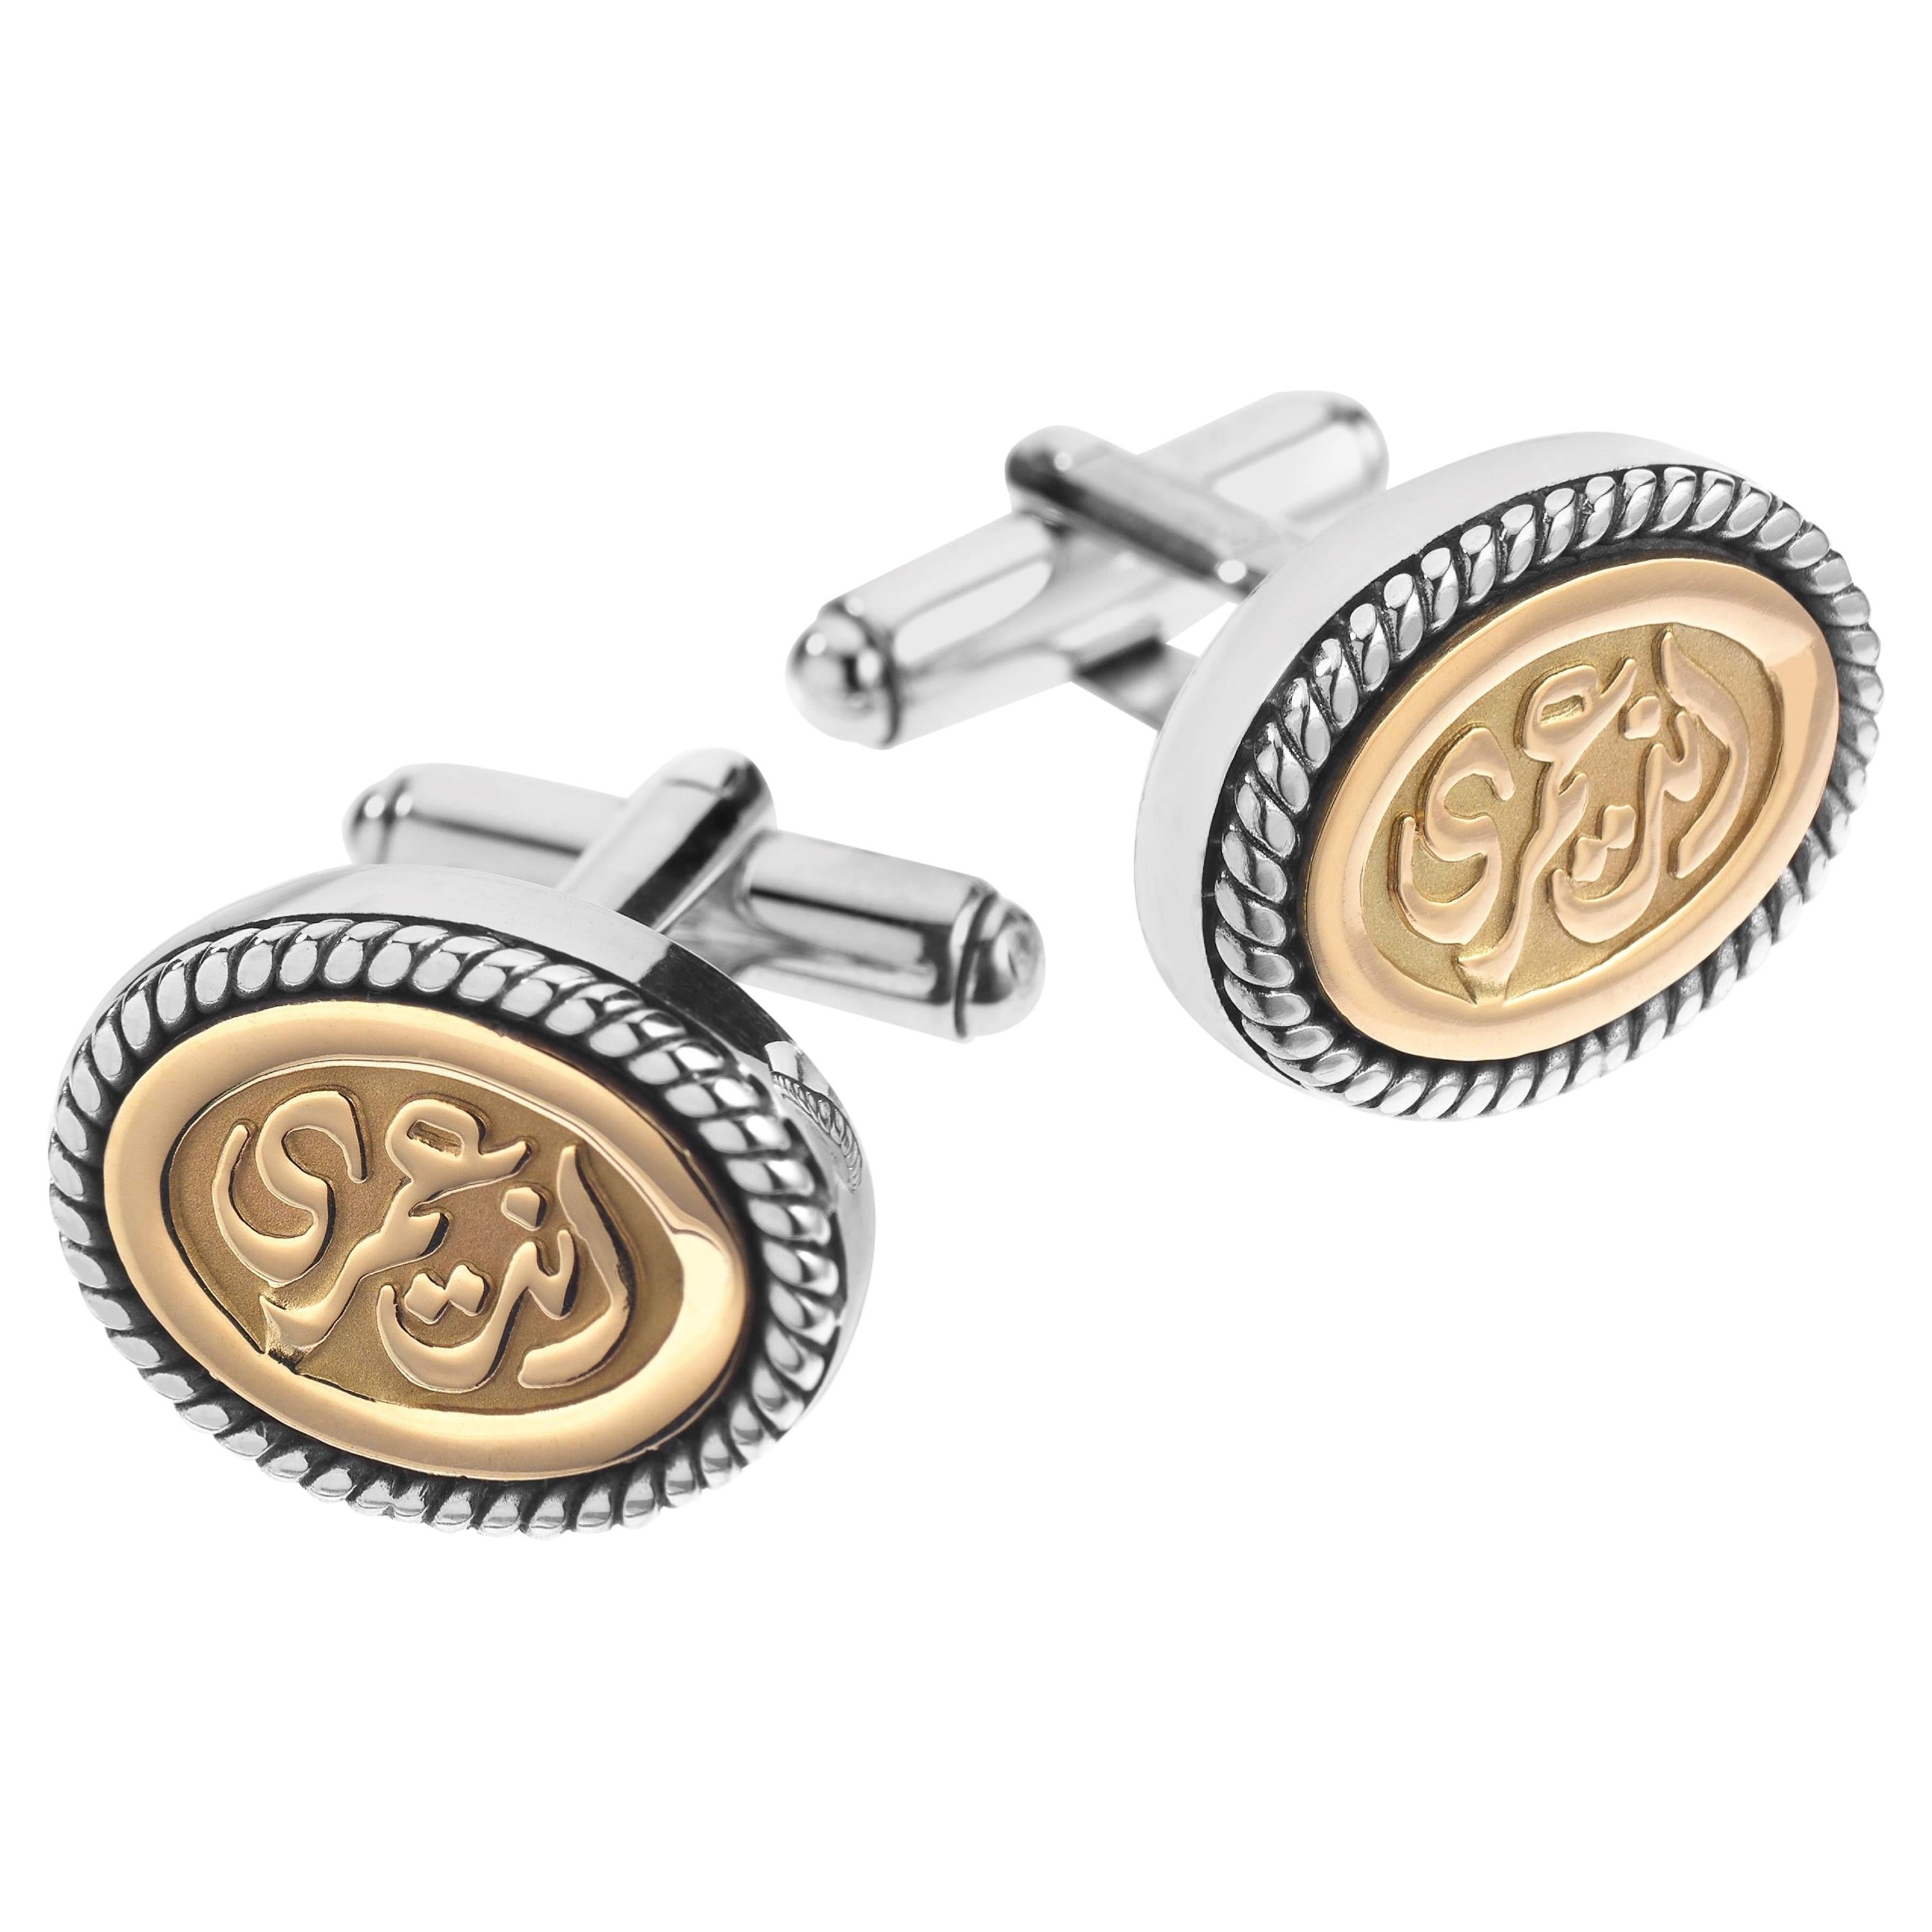 18 Karat Gold and Sterling Silver "My Eternity" Classic Calligraphy Cufflinks